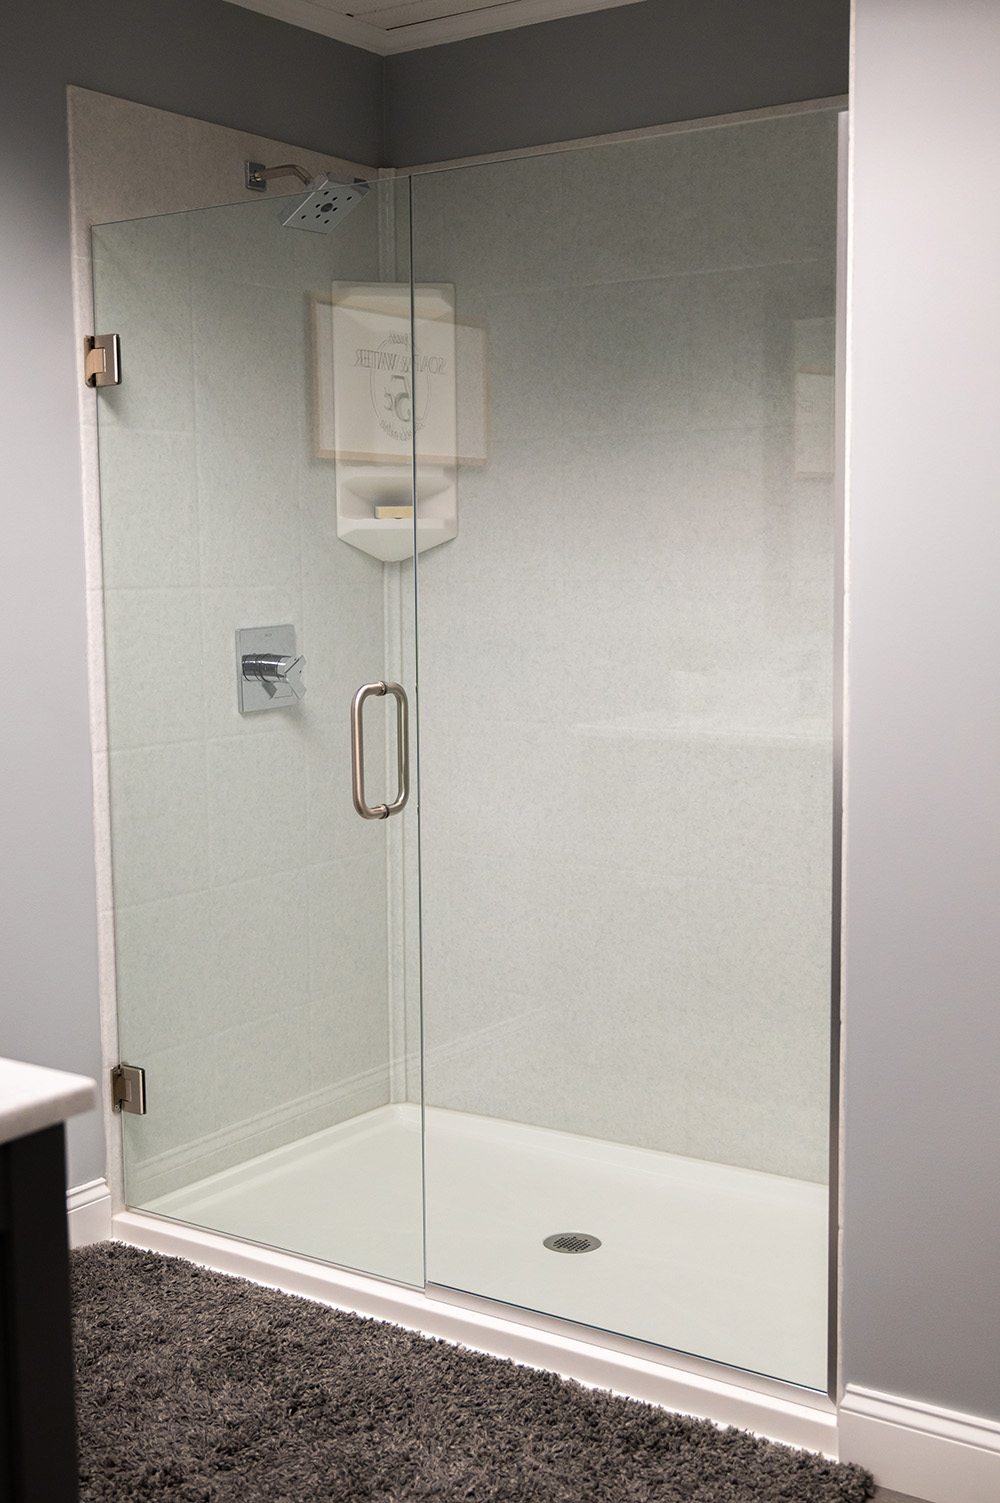 Top 3 Reasons to Choose Solid Surface Shower Panels over Traditional Tile